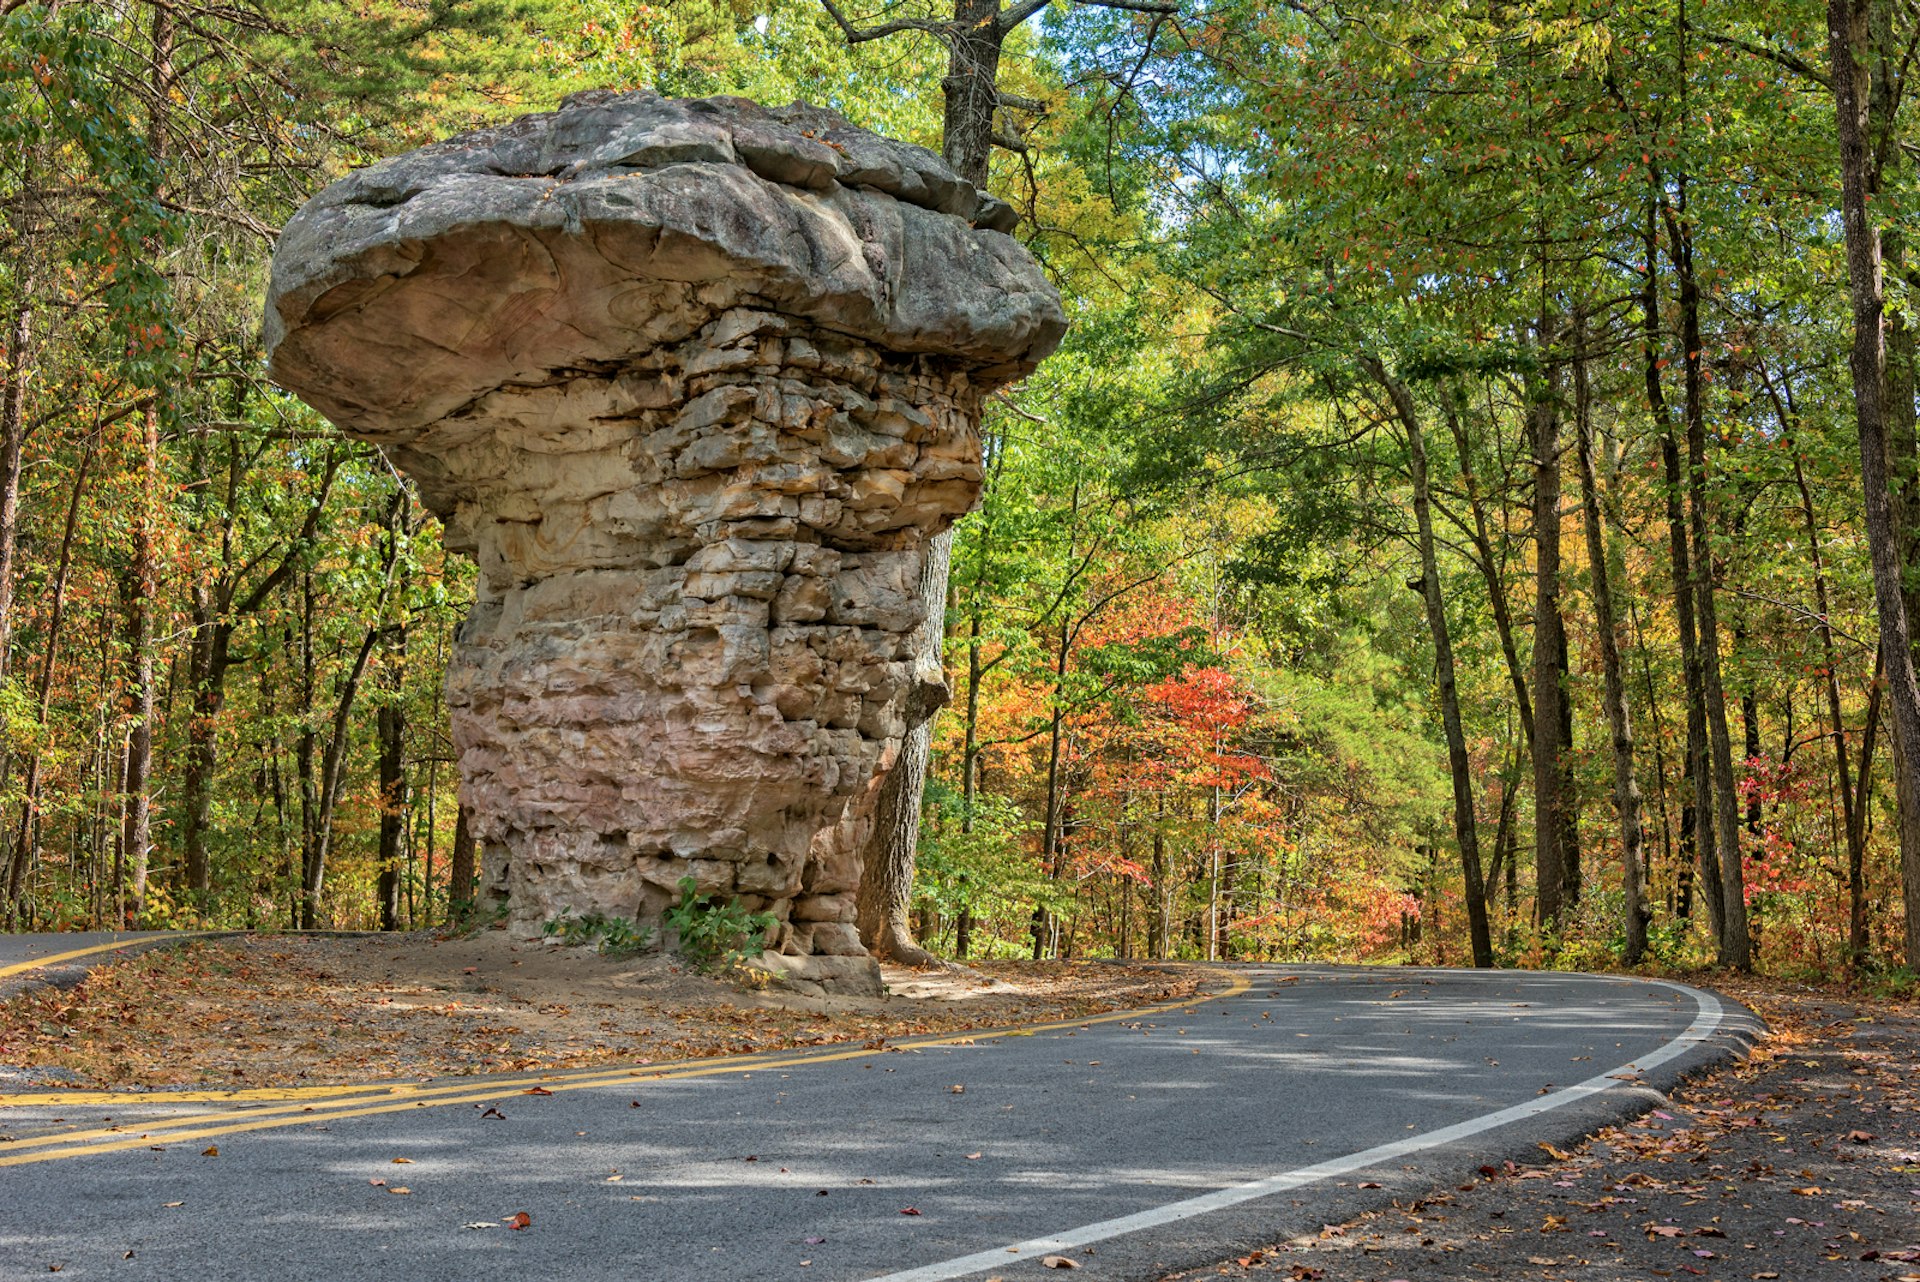 A mushroom-shaped rock near a winding road, with trees surrounding; best summer trips in the Southern US